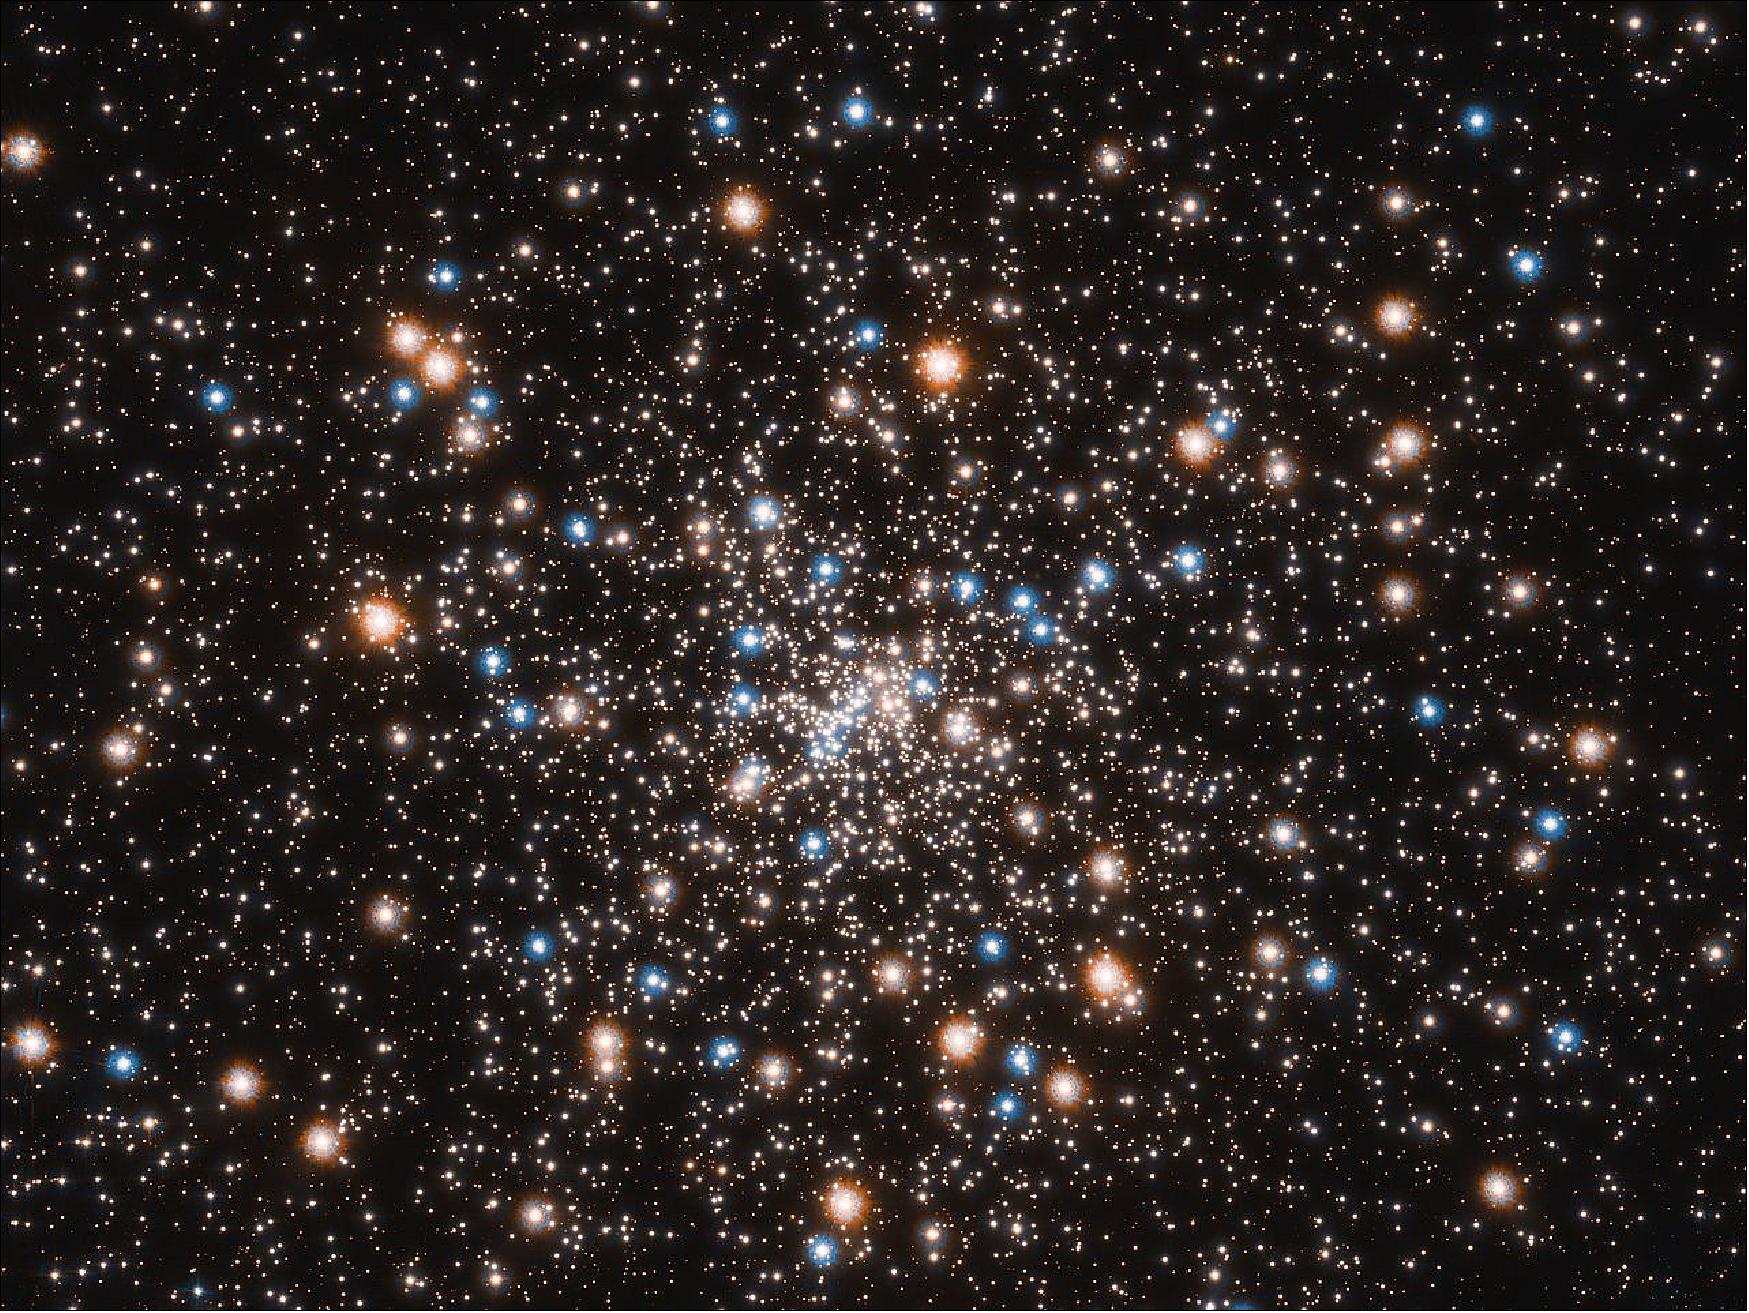 Figure 117: This ancient stellar jewelry box, a globular cluster called NGC 6397, glitters with the light from hundreds of thousands of stars. Astronomers used the NASA/ESA Hubble Space Telescope to gauge the cluster's distance at 7800 light-years away. NGC 6397 is one of the closest globular clusters to Earth. The cluster's blue stars are near the end of their lives. These stars have used up their hydrogen fuel that makes them shine. Now they are converting helium to energy in their cores, which fuses at a higher temperature and appears blue. - The reddish glow is from red giant stars that have consumed their hydrogen fuel and have expanded in size. The myriad small white objects include stars like our Sun. This image is composed of a series of observations taken from July 2004 to June 2005 with Hubble's Advanced Camera for Surveys. The research team used Hubble's Wide Field Camera 3 to measure the distance to the cluster [image credit: NASA, ESA, and T. Brown and S. Casertano (STScI), Acknowledgement: NASA, ESA, and J. Anderson (STScI)]